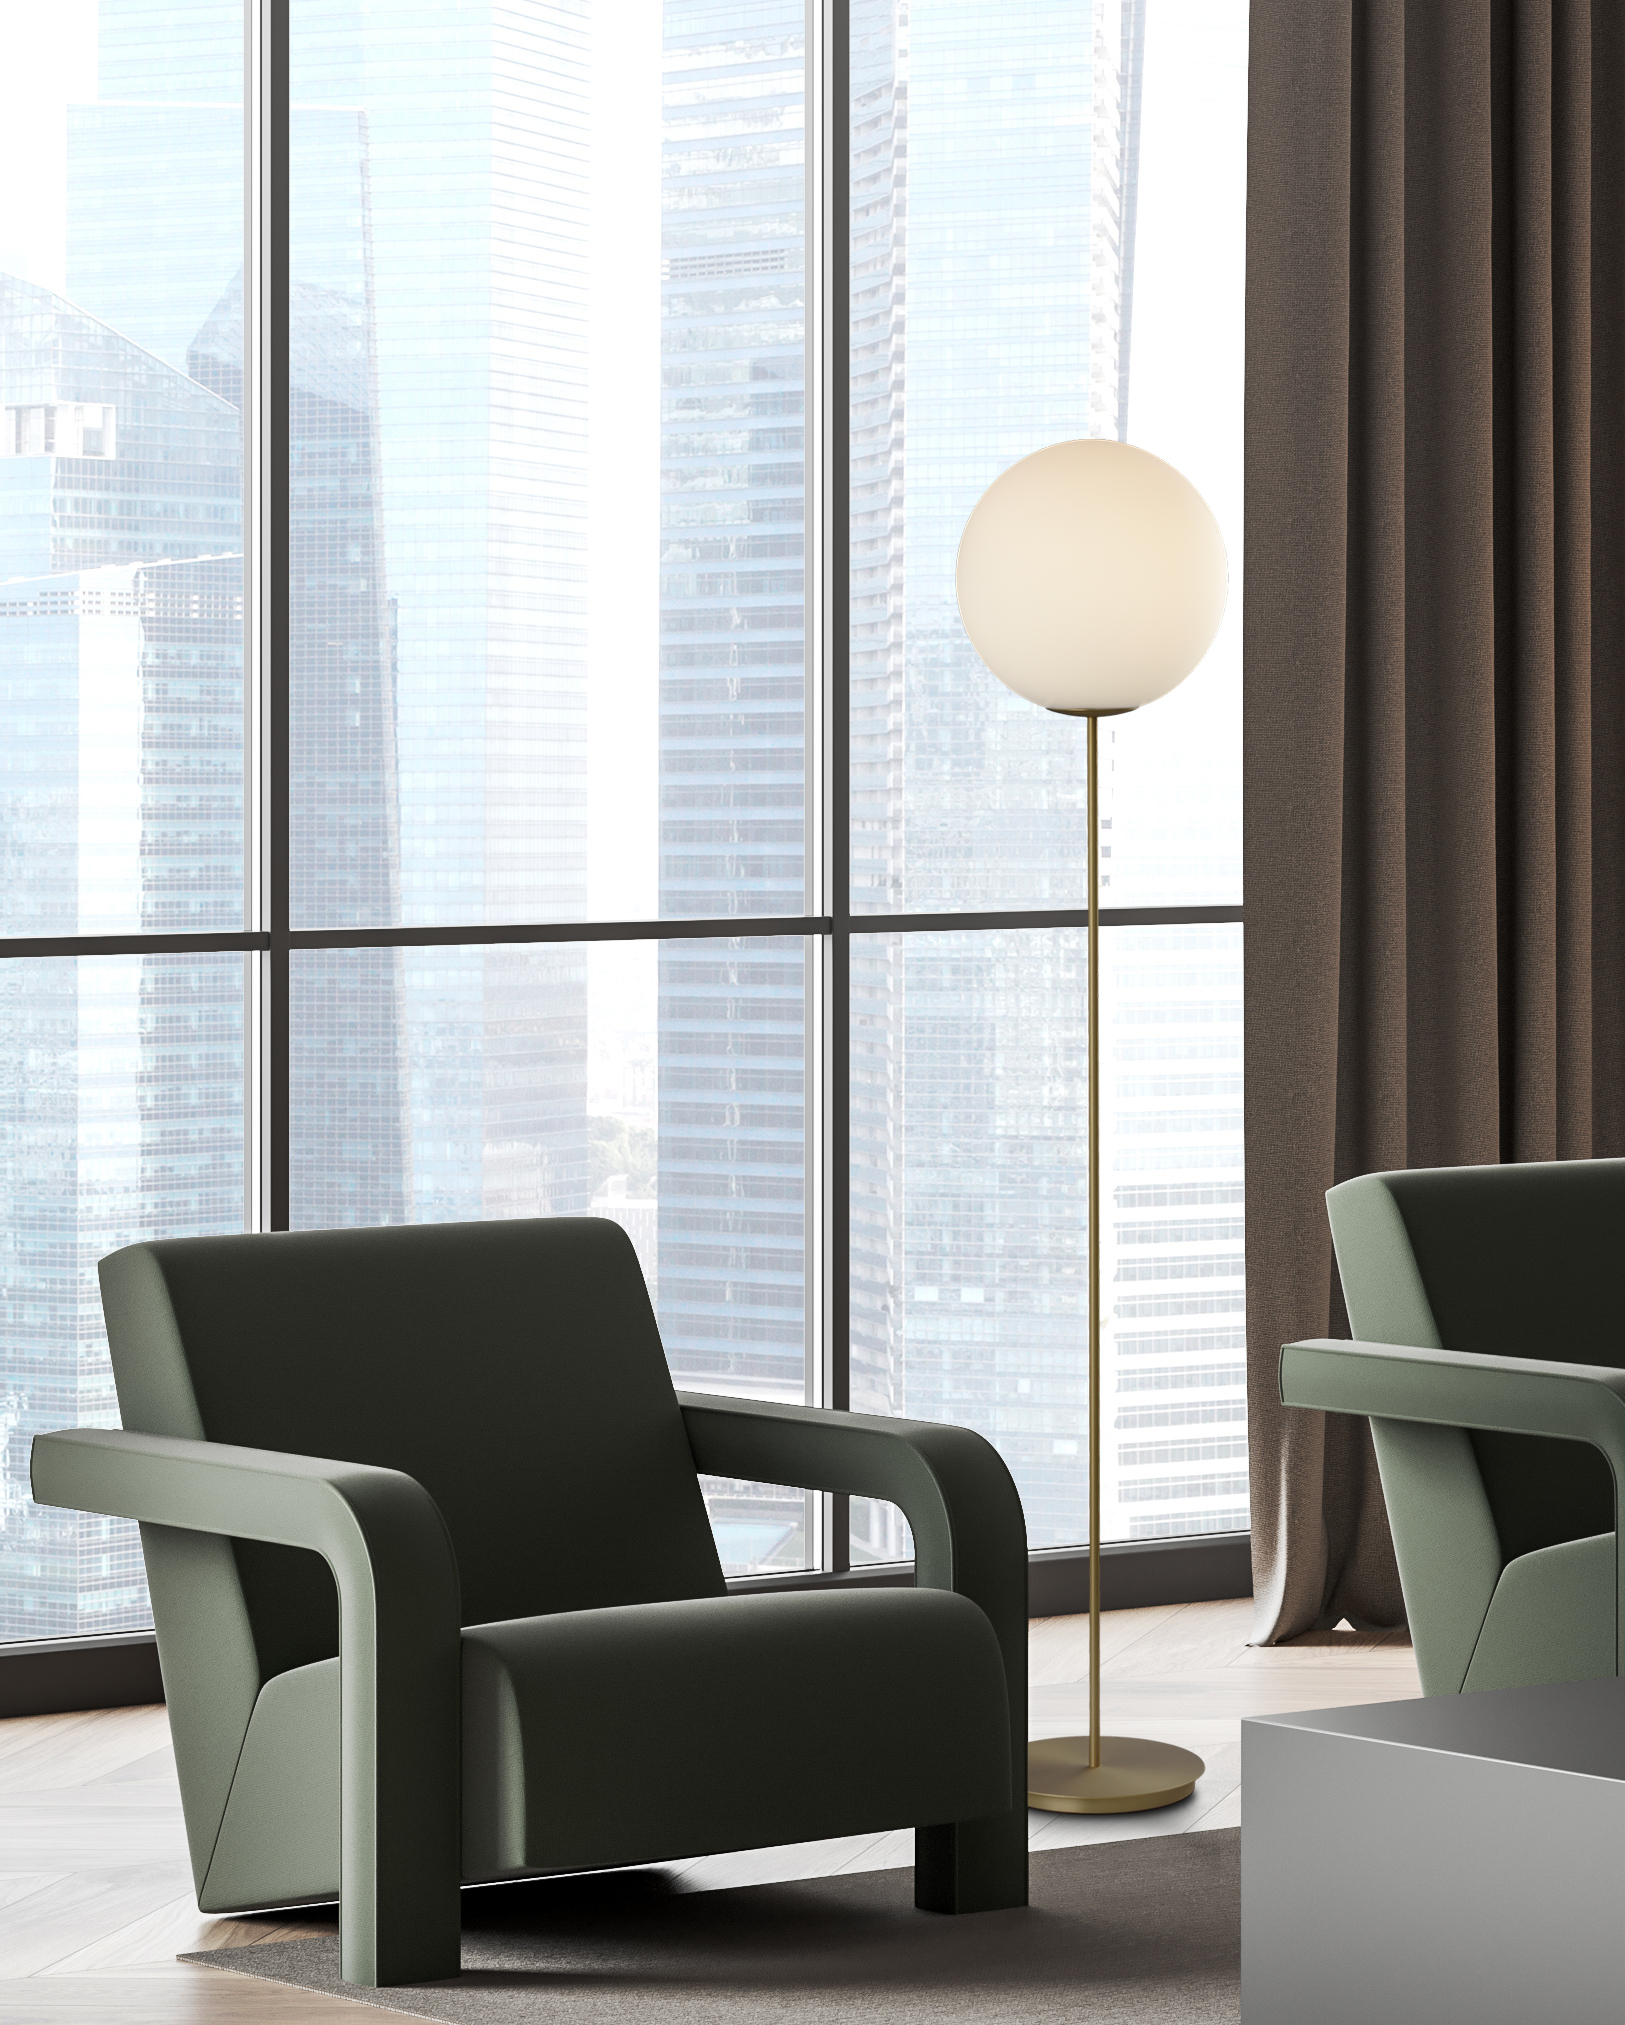 Light relax room interior with armchairs and window. Mockup frame